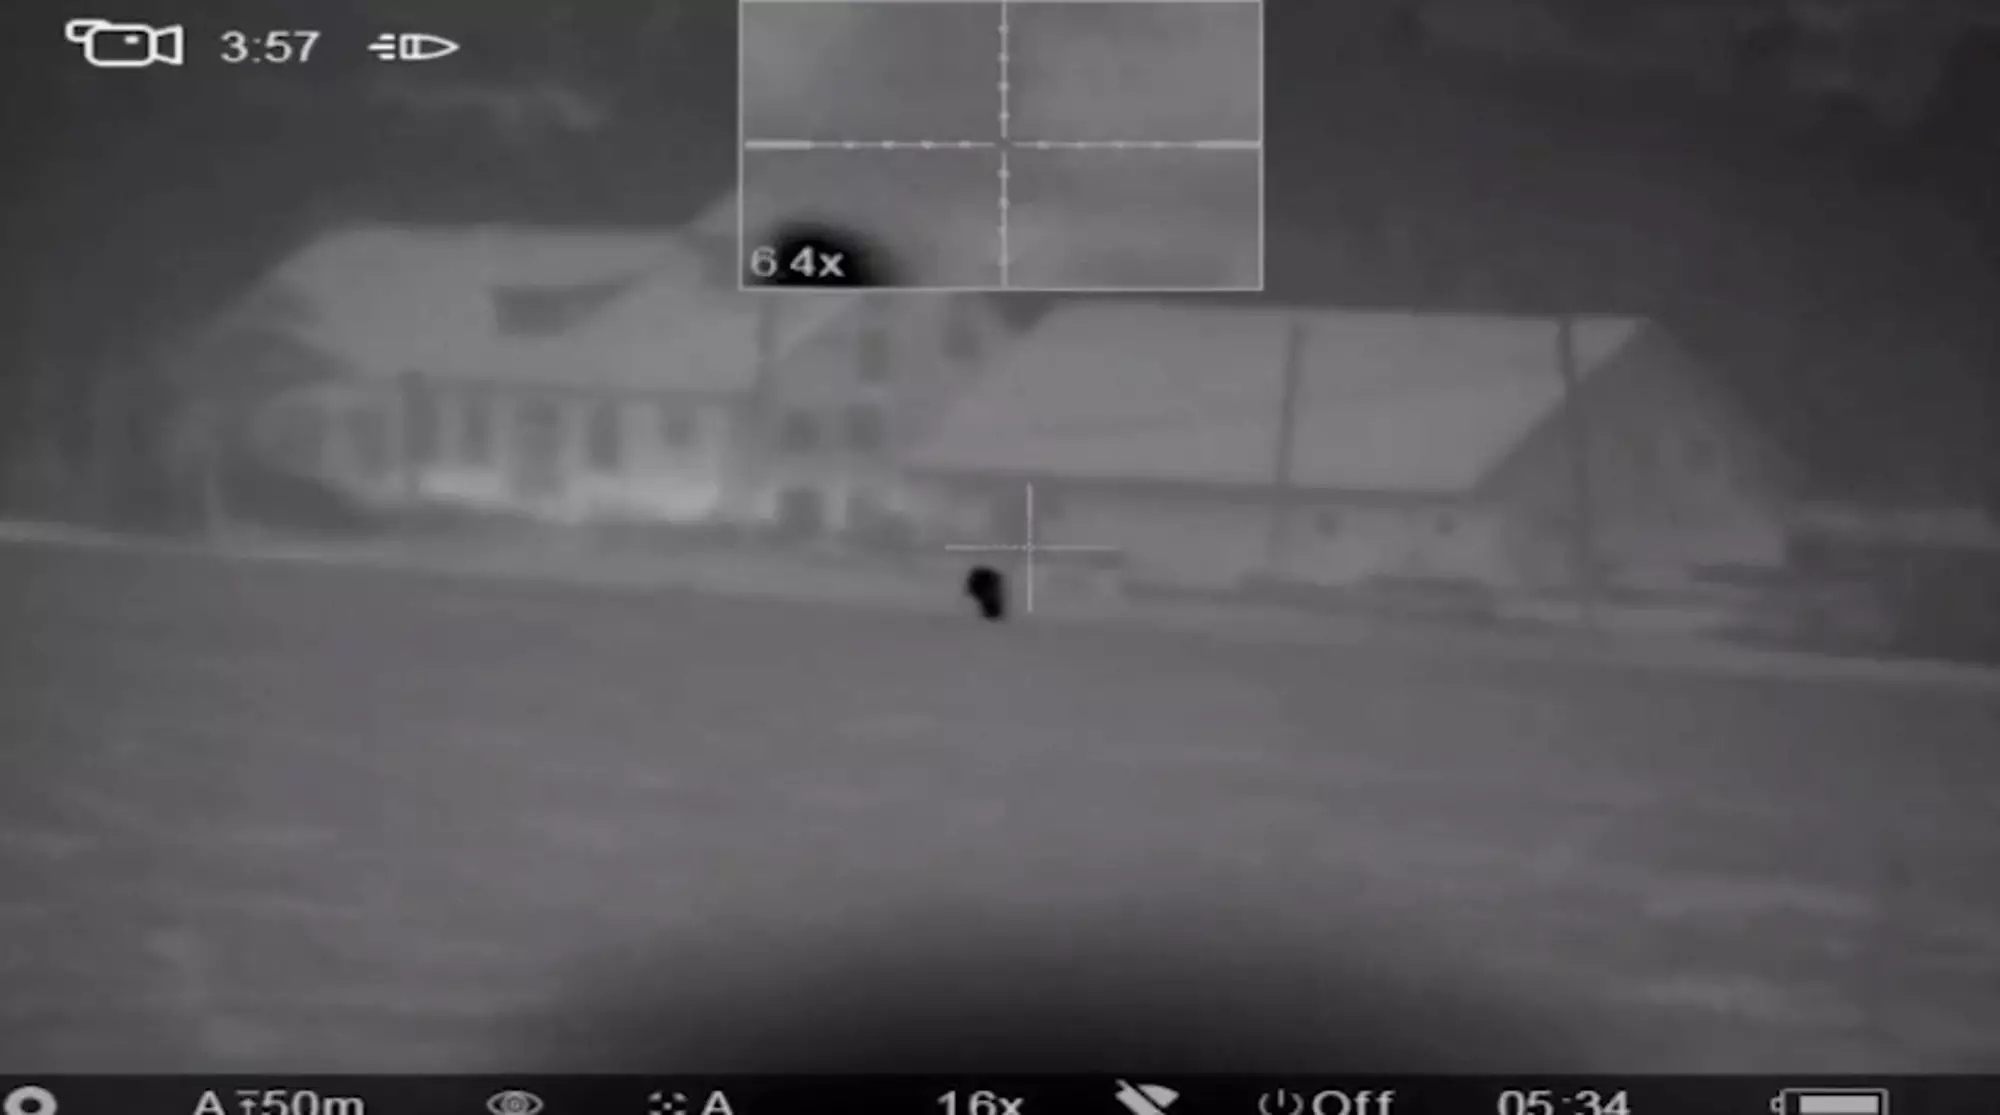 Scope footage is a key piece of evidence in the trial.